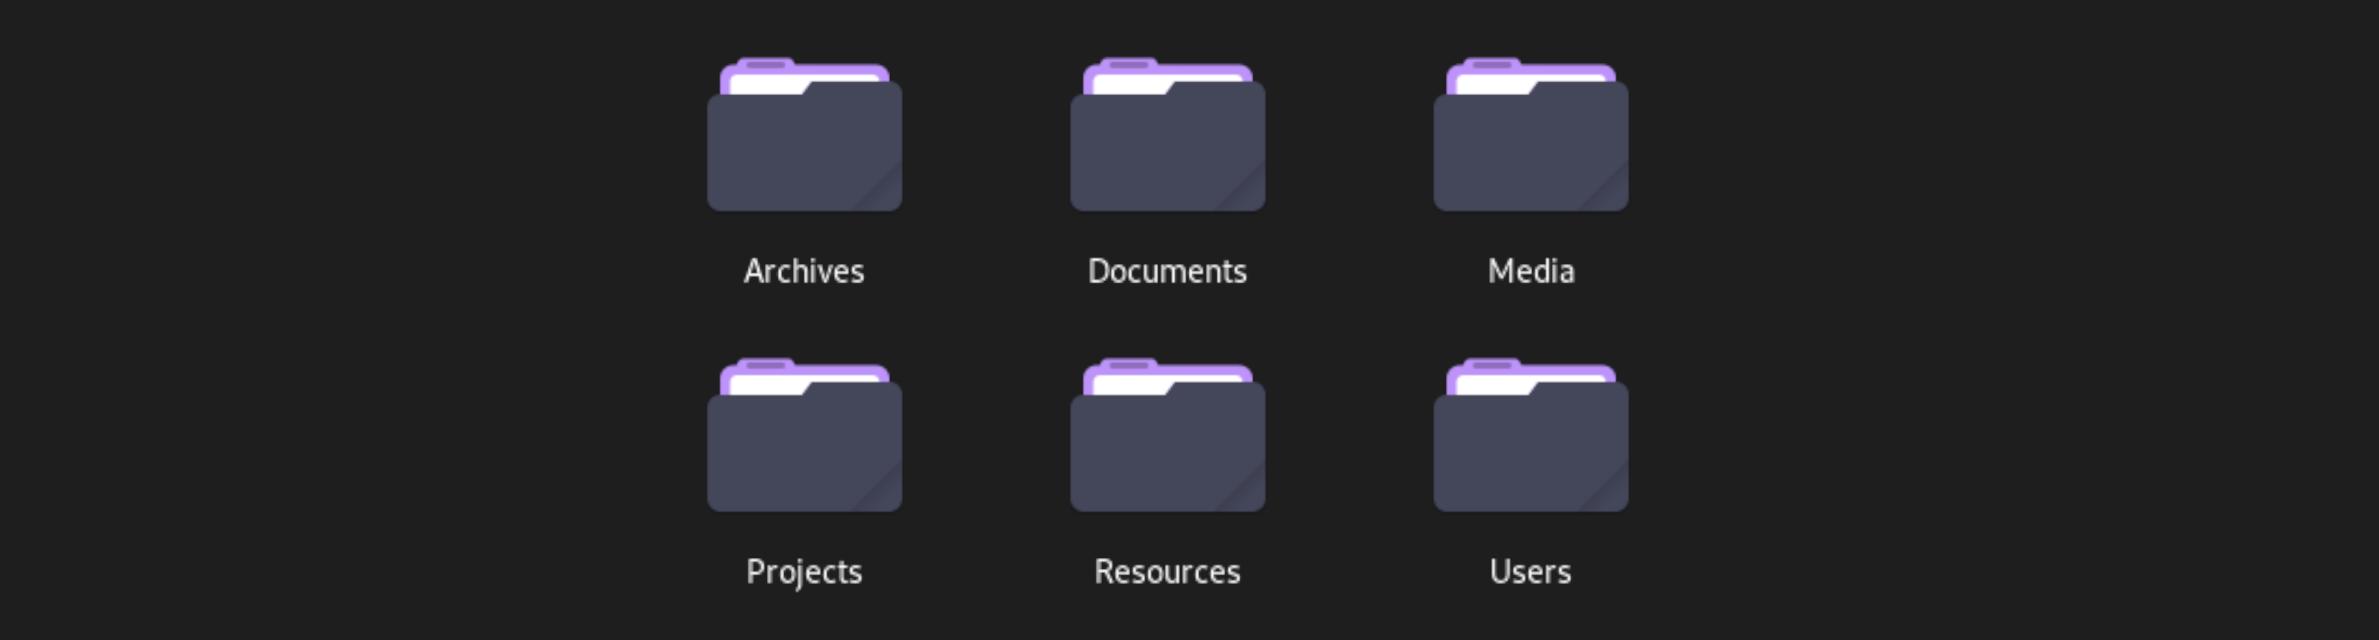 File Naming and Organization Best Practices